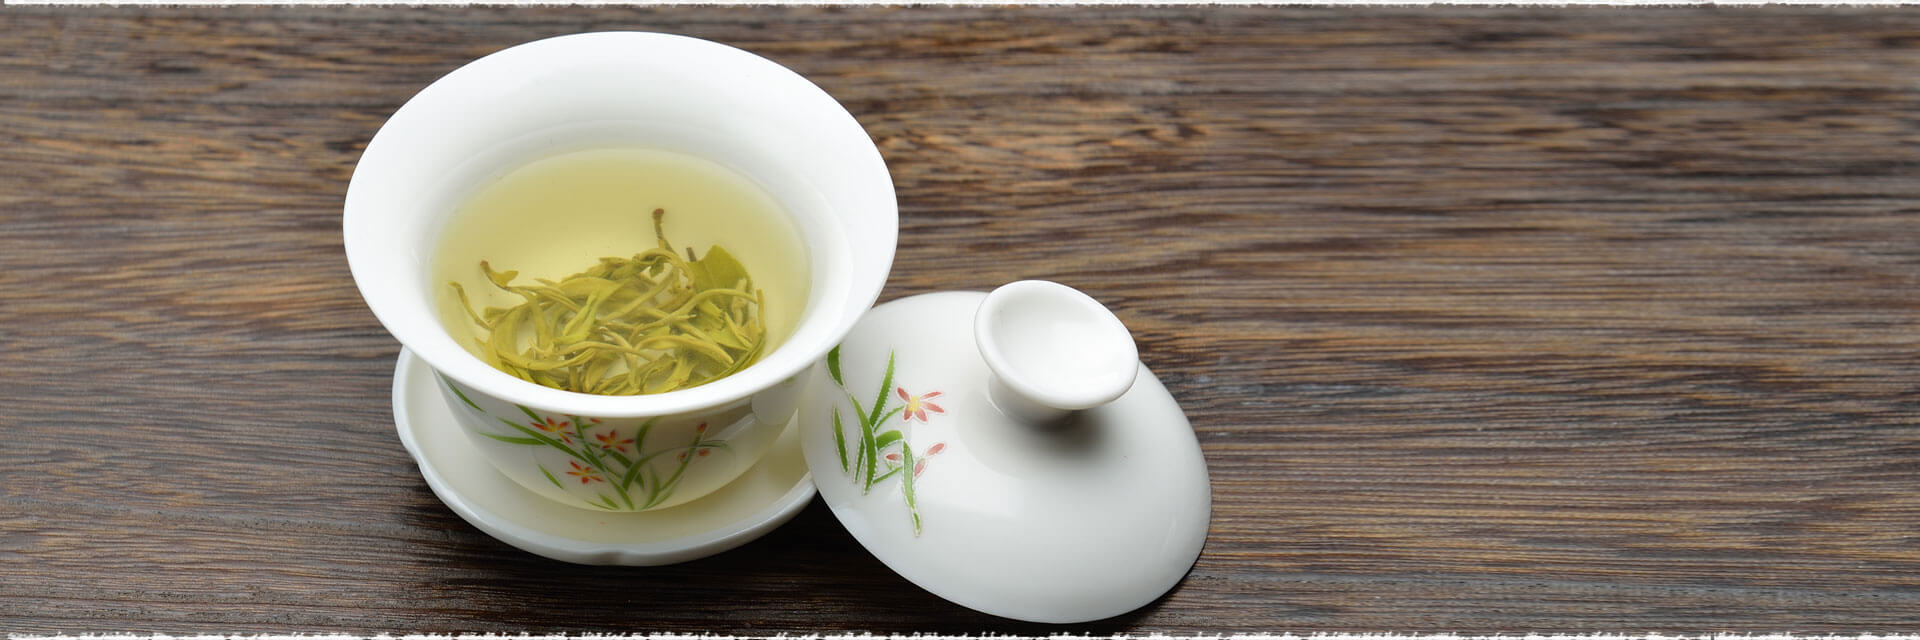 How to Brew the Famous Chinese Bi Luo Chun Green Tea